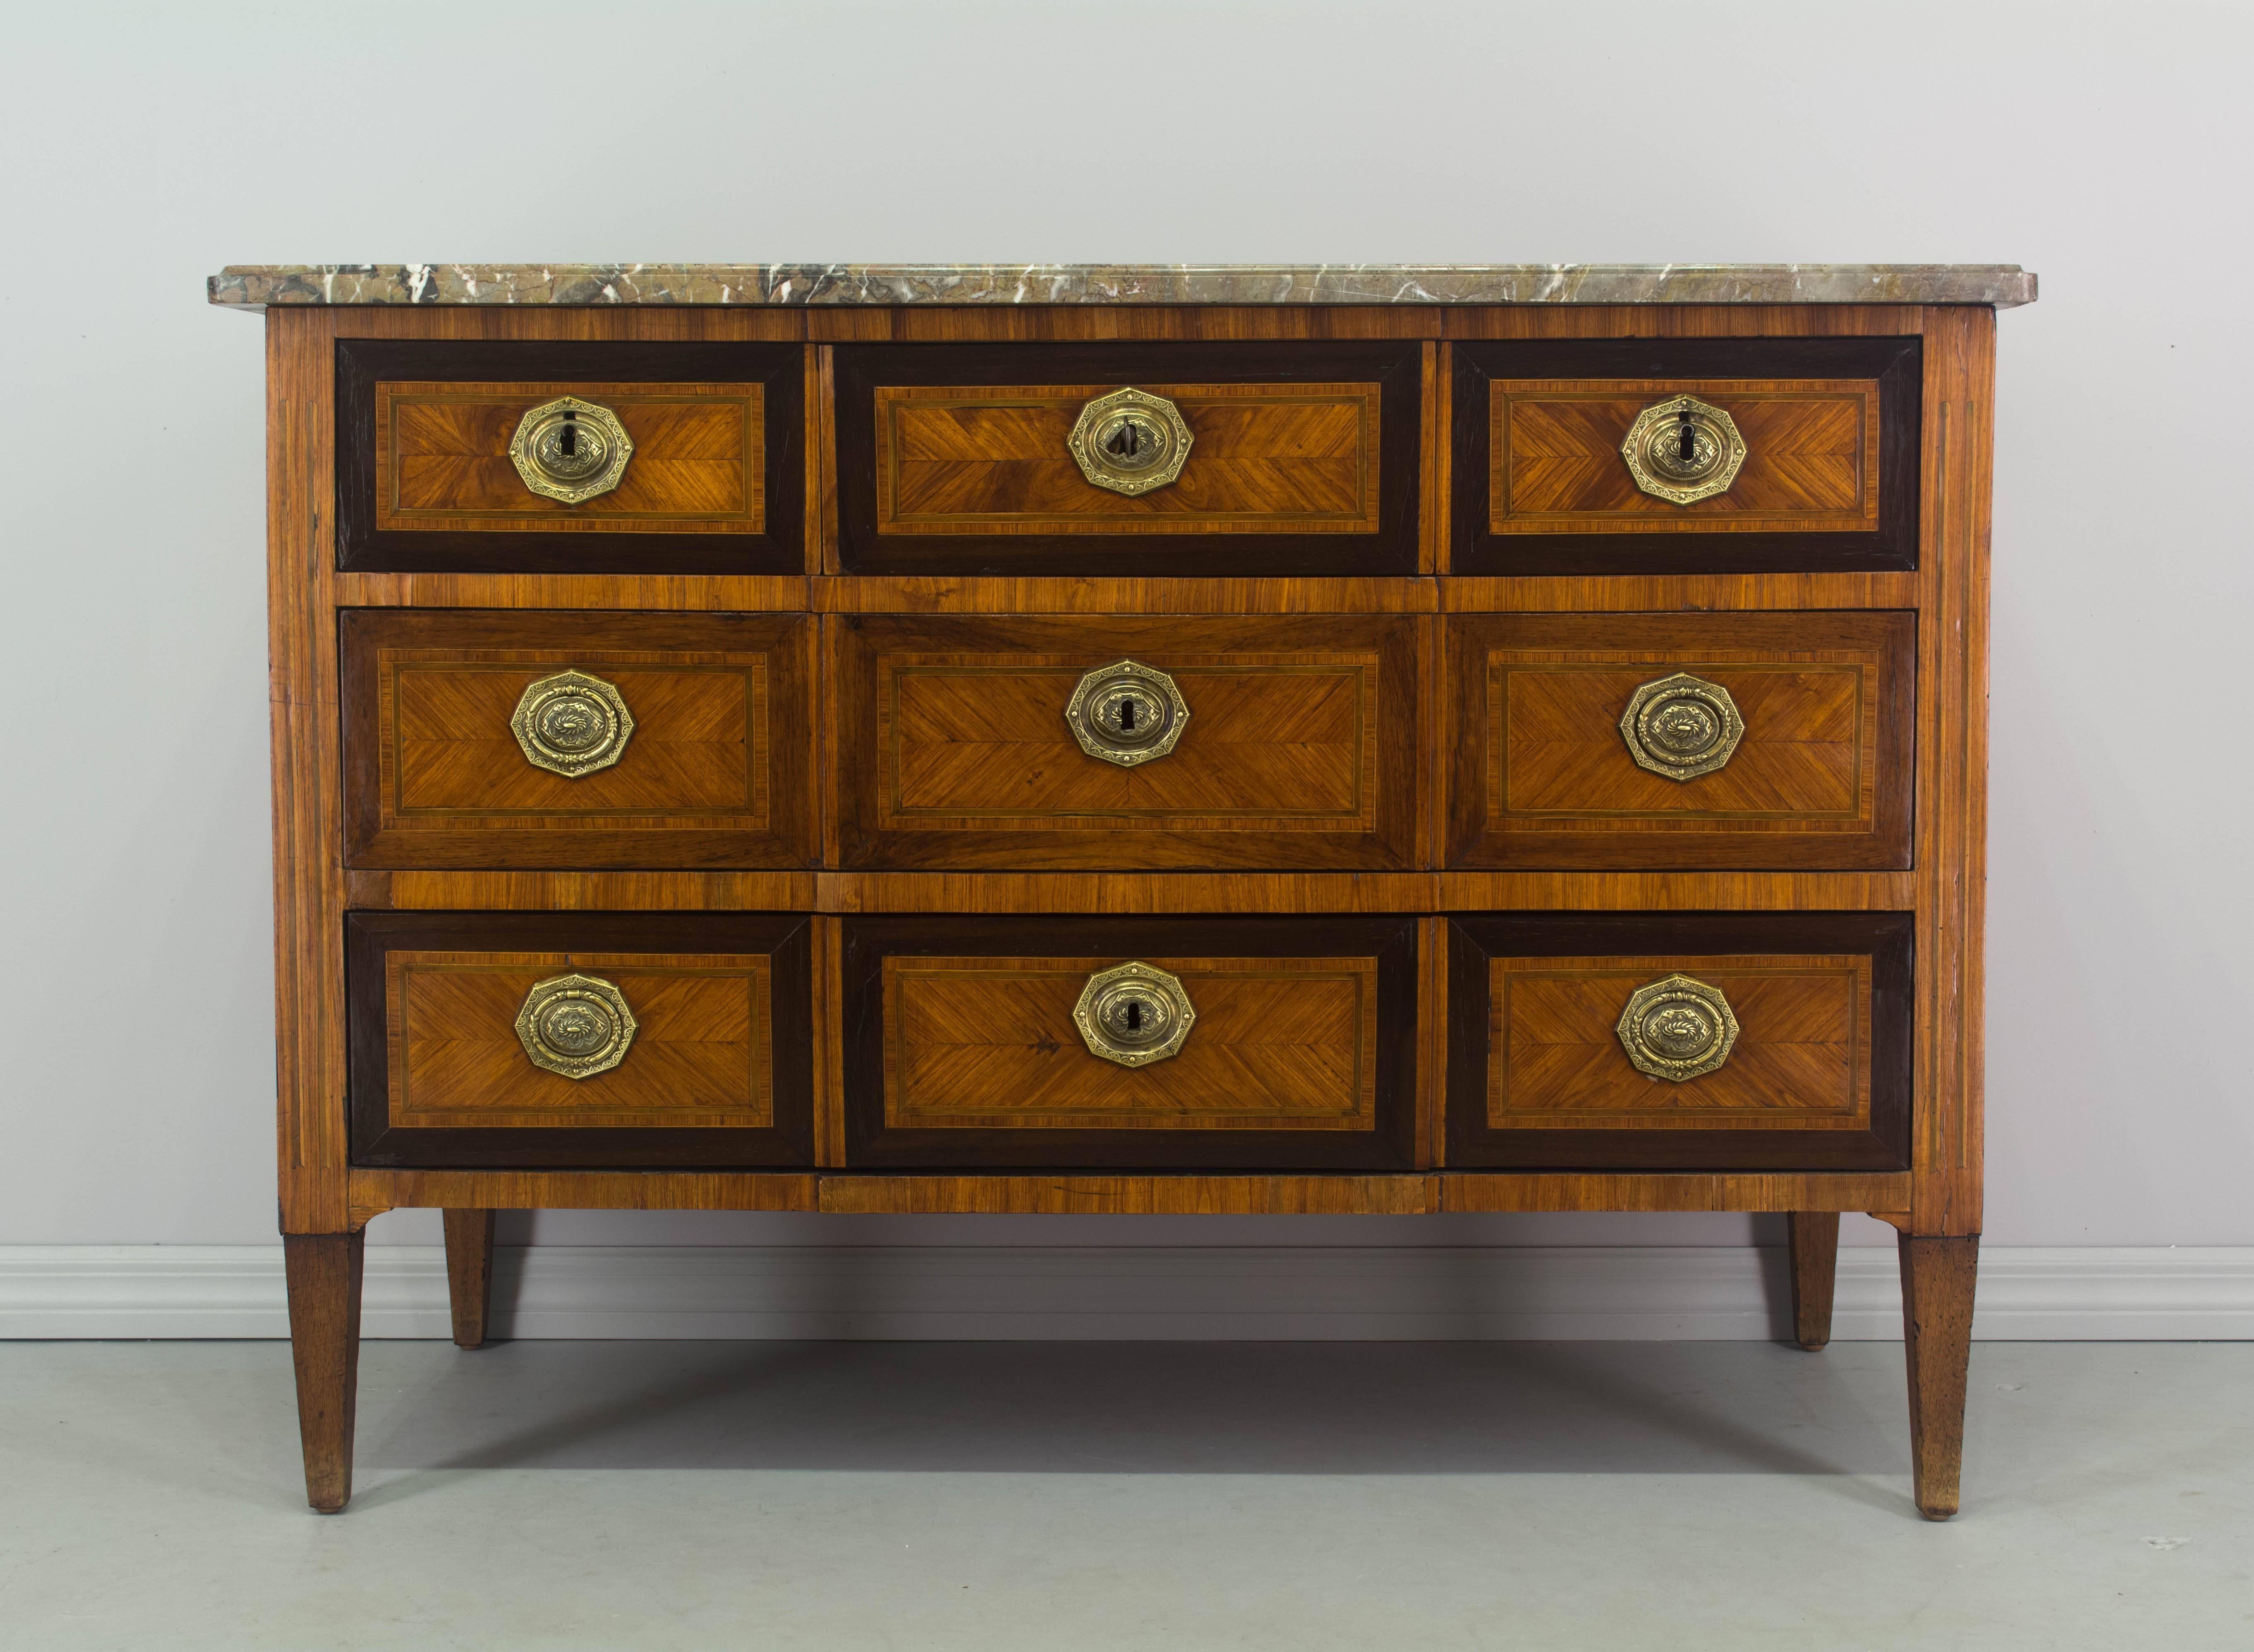 18th century Louis XVI commode inlaid with veneers of walnut and mahogany with pine as a secondary wood. French polish finish. Five dovetailed drawers with original brass hardware. All drawers have working locks with one key. The left and right top